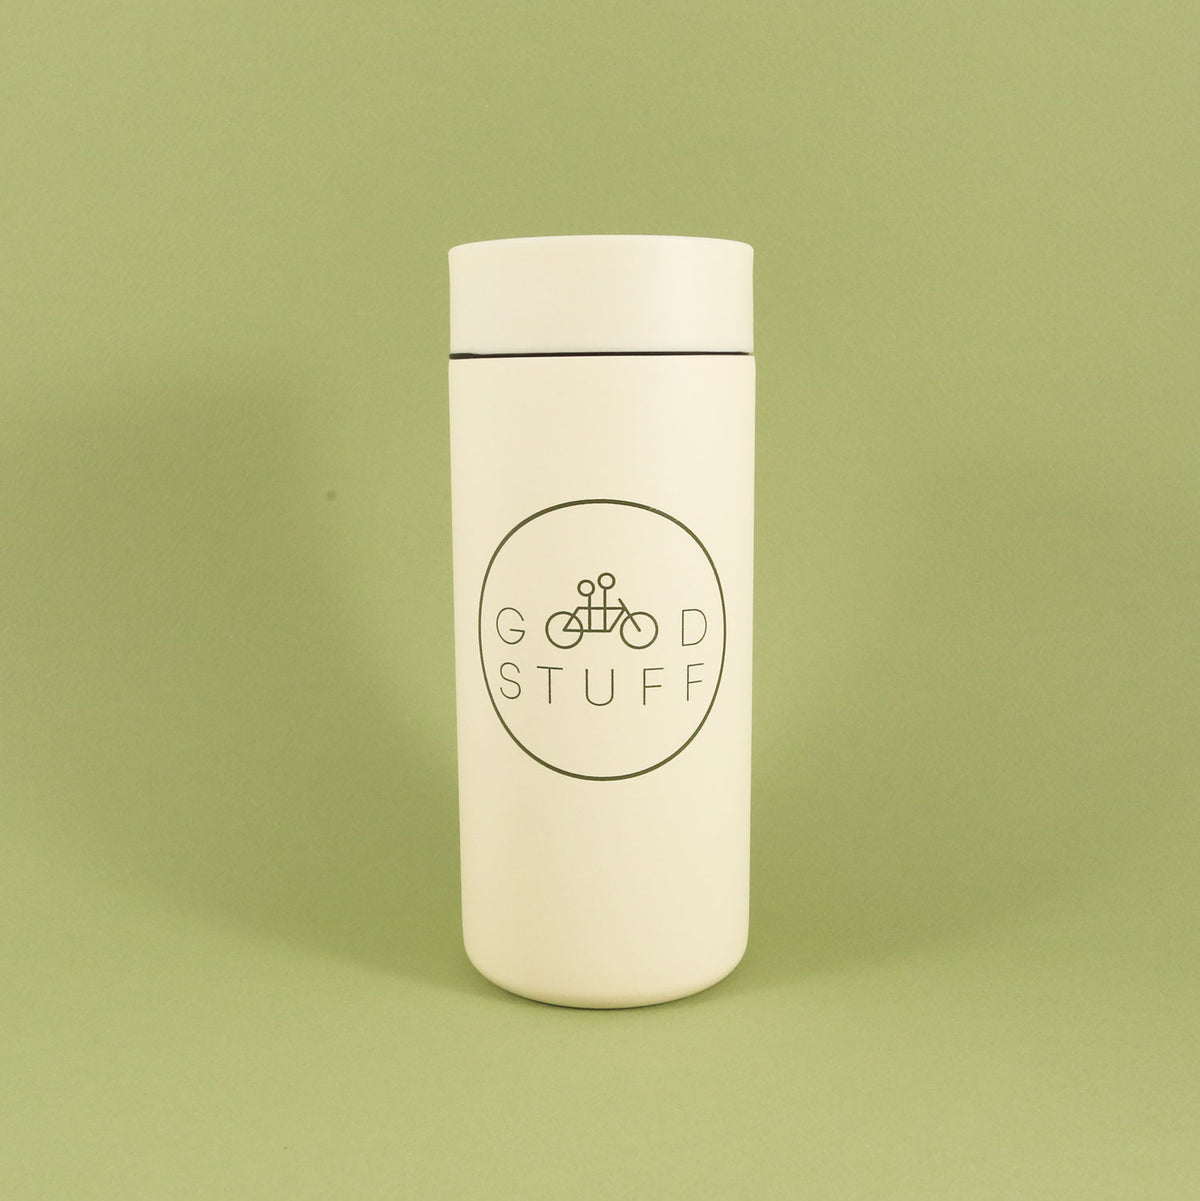 A MiiR 360 Traveler "GOOD STUFF" Mug from Tandem Coffee Roasters, with a logo that reads "good stuff" encircling a bicycle image, set against a solid light green background.